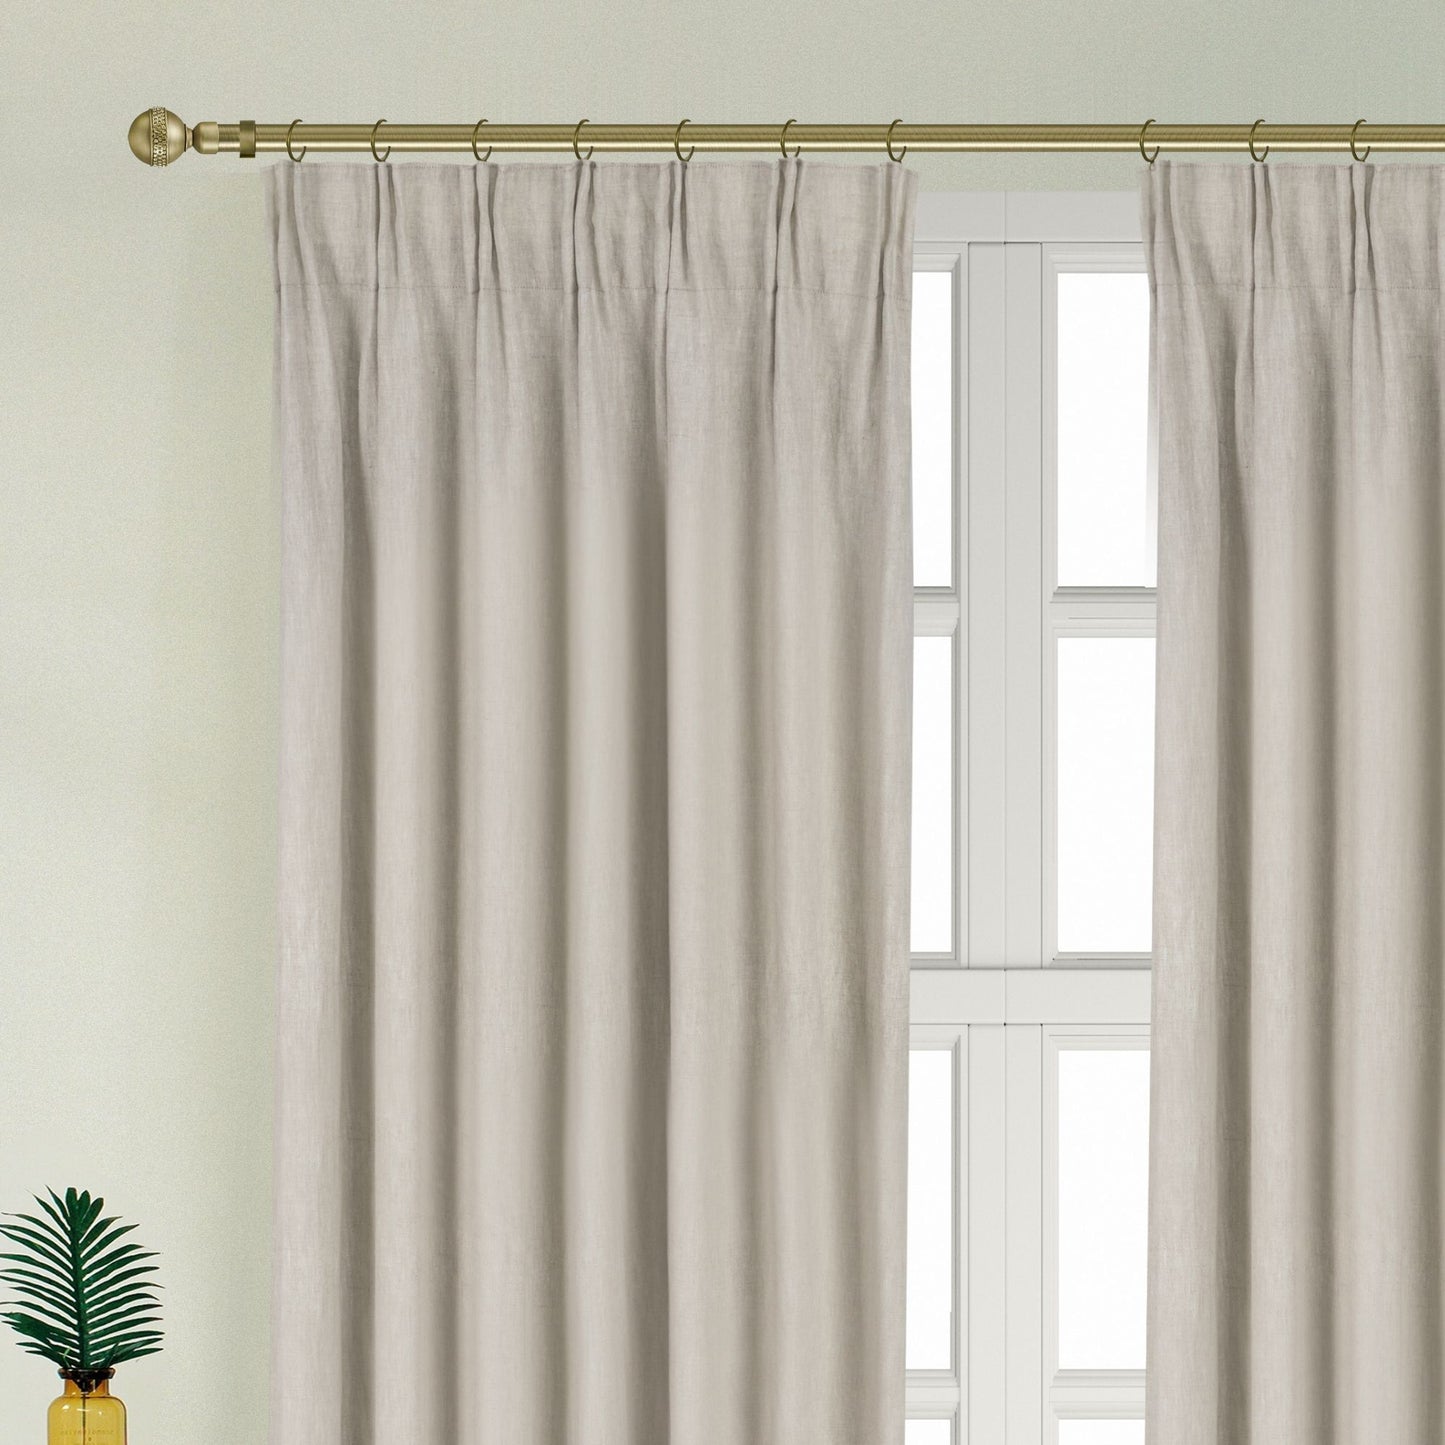 Newport Cotton Lining Window Curtains for Bedroom, Linen Curtains for Living Room, 84 Inches Long Curtains for Living Room, Greige